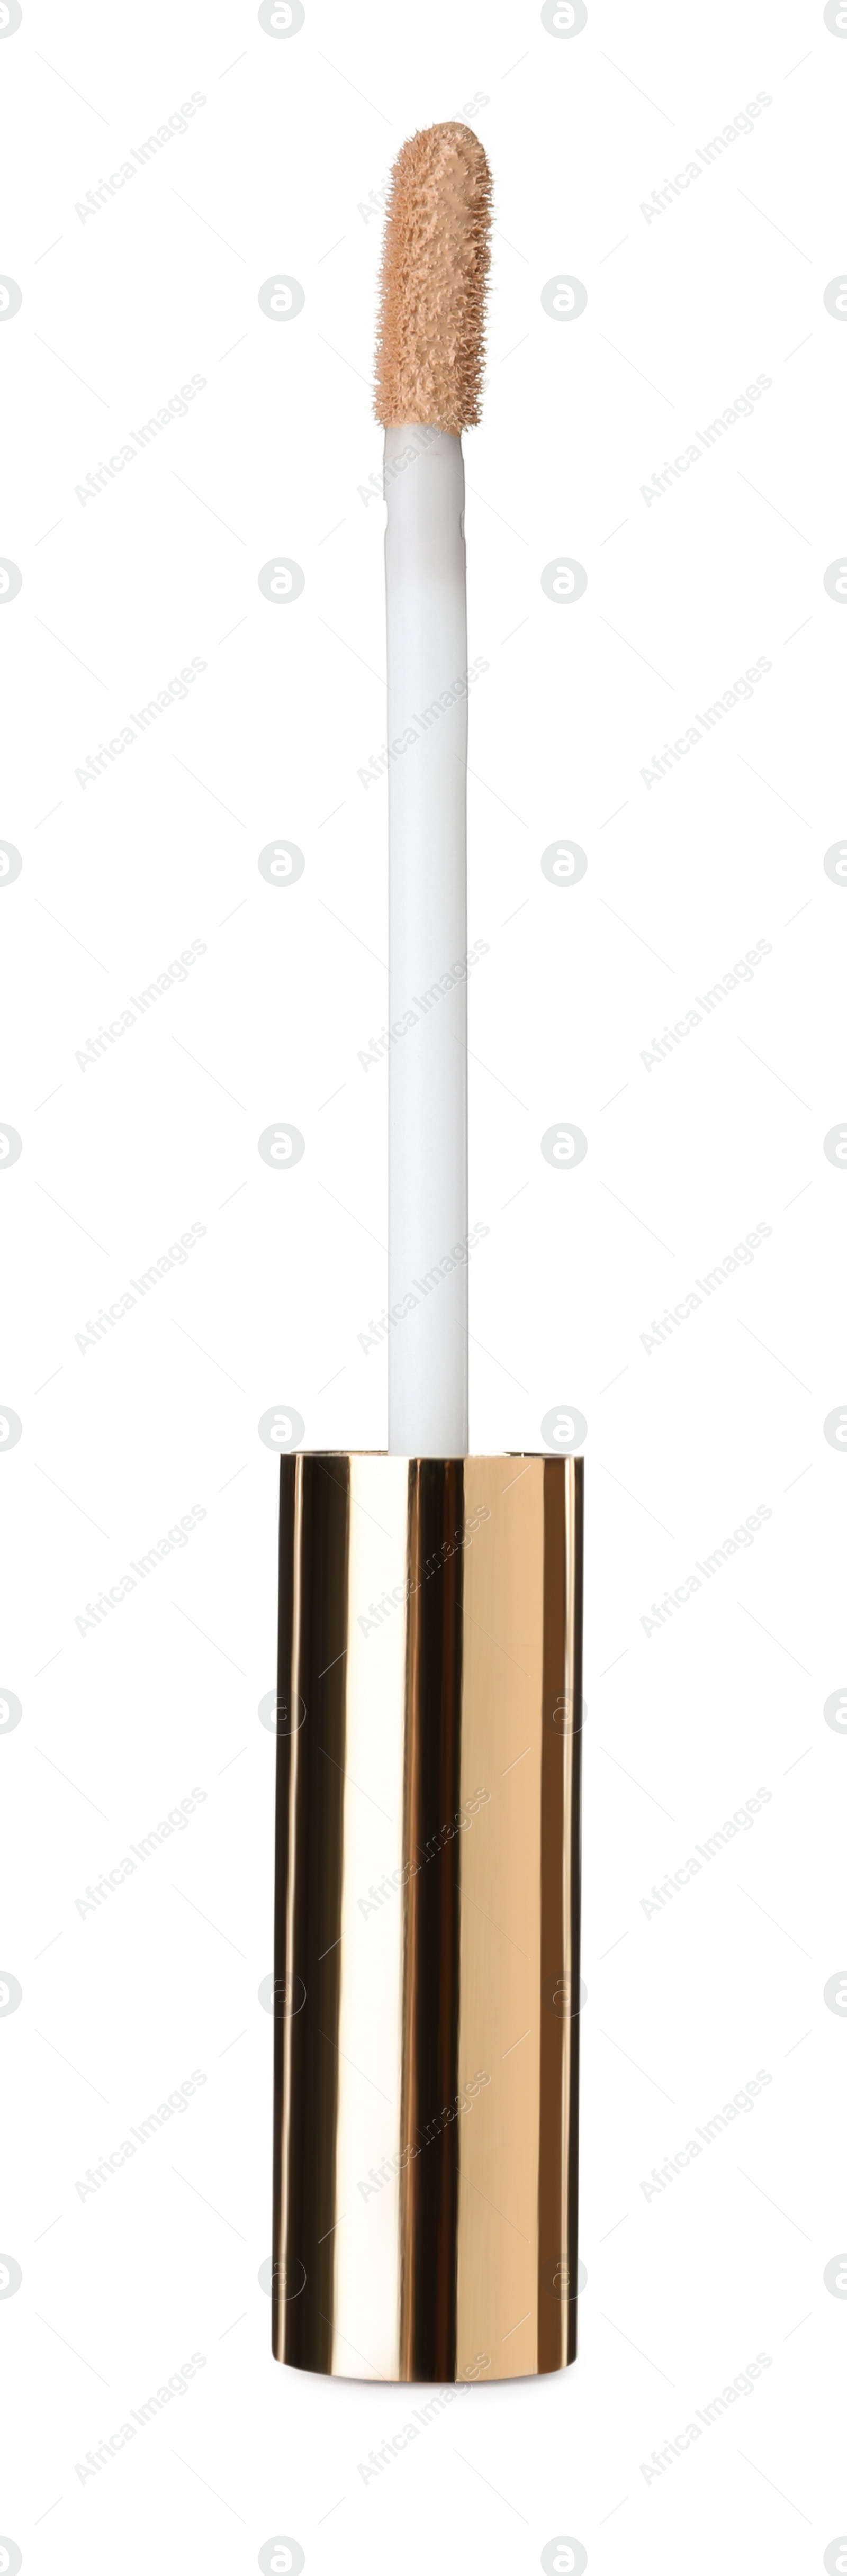 Photo of Brush of concealer isolated on white. Makeup product